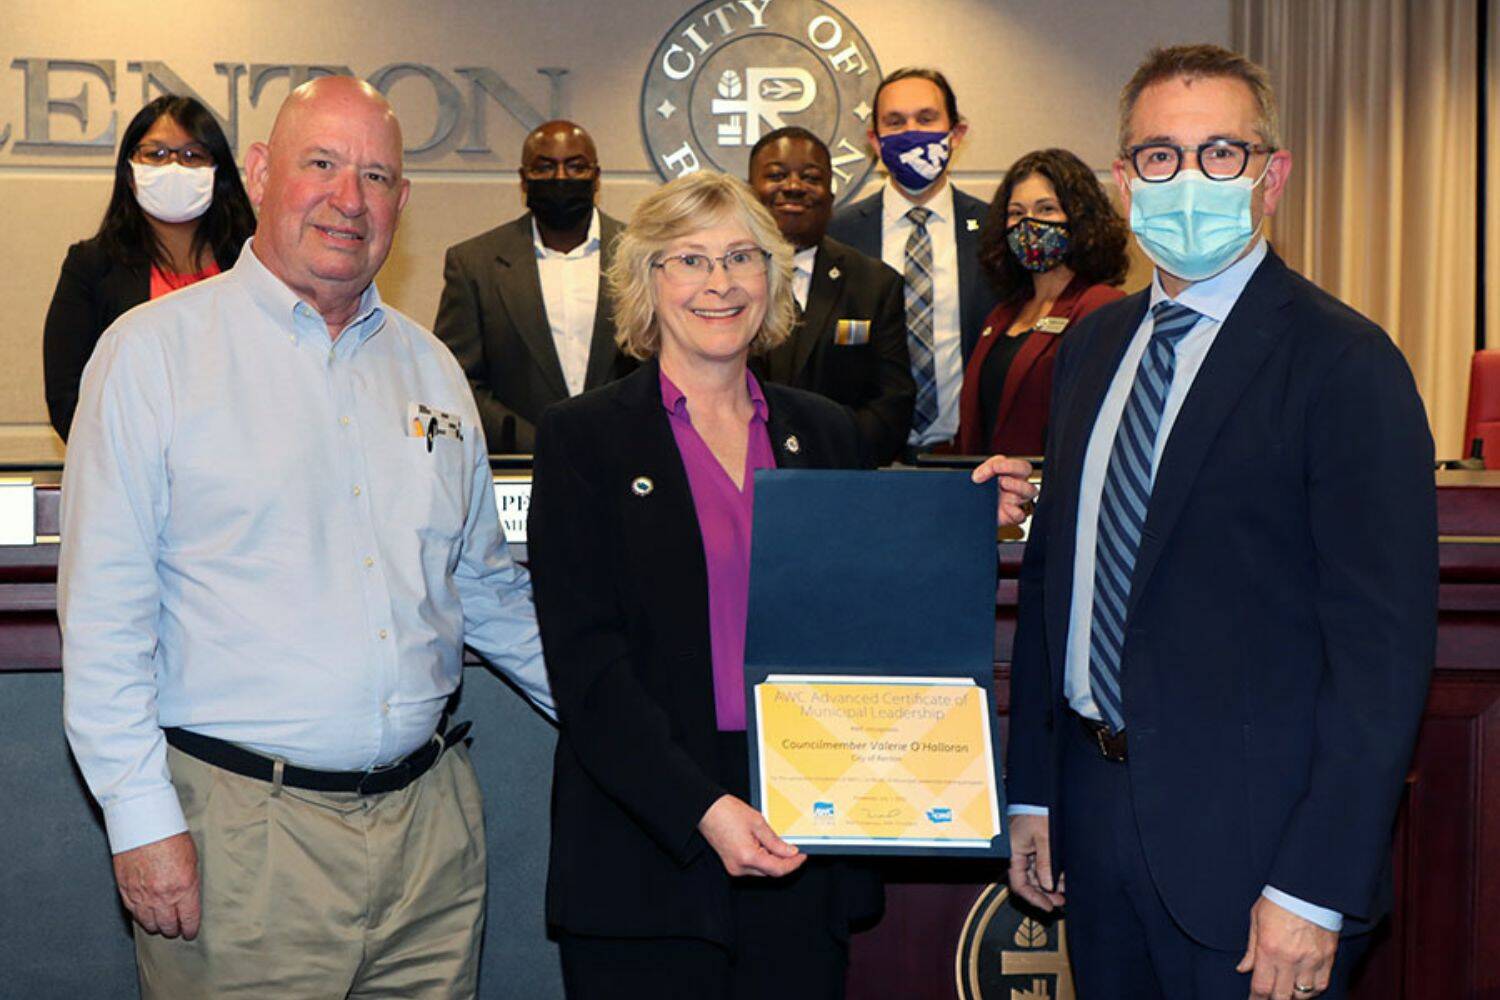 Renton City Councilmember Valerie O’Halloran (middle) being awarded an Advanced Certificate of Municipal Leadership from the Association of Washington Cities (Courtesy of City of Renton)